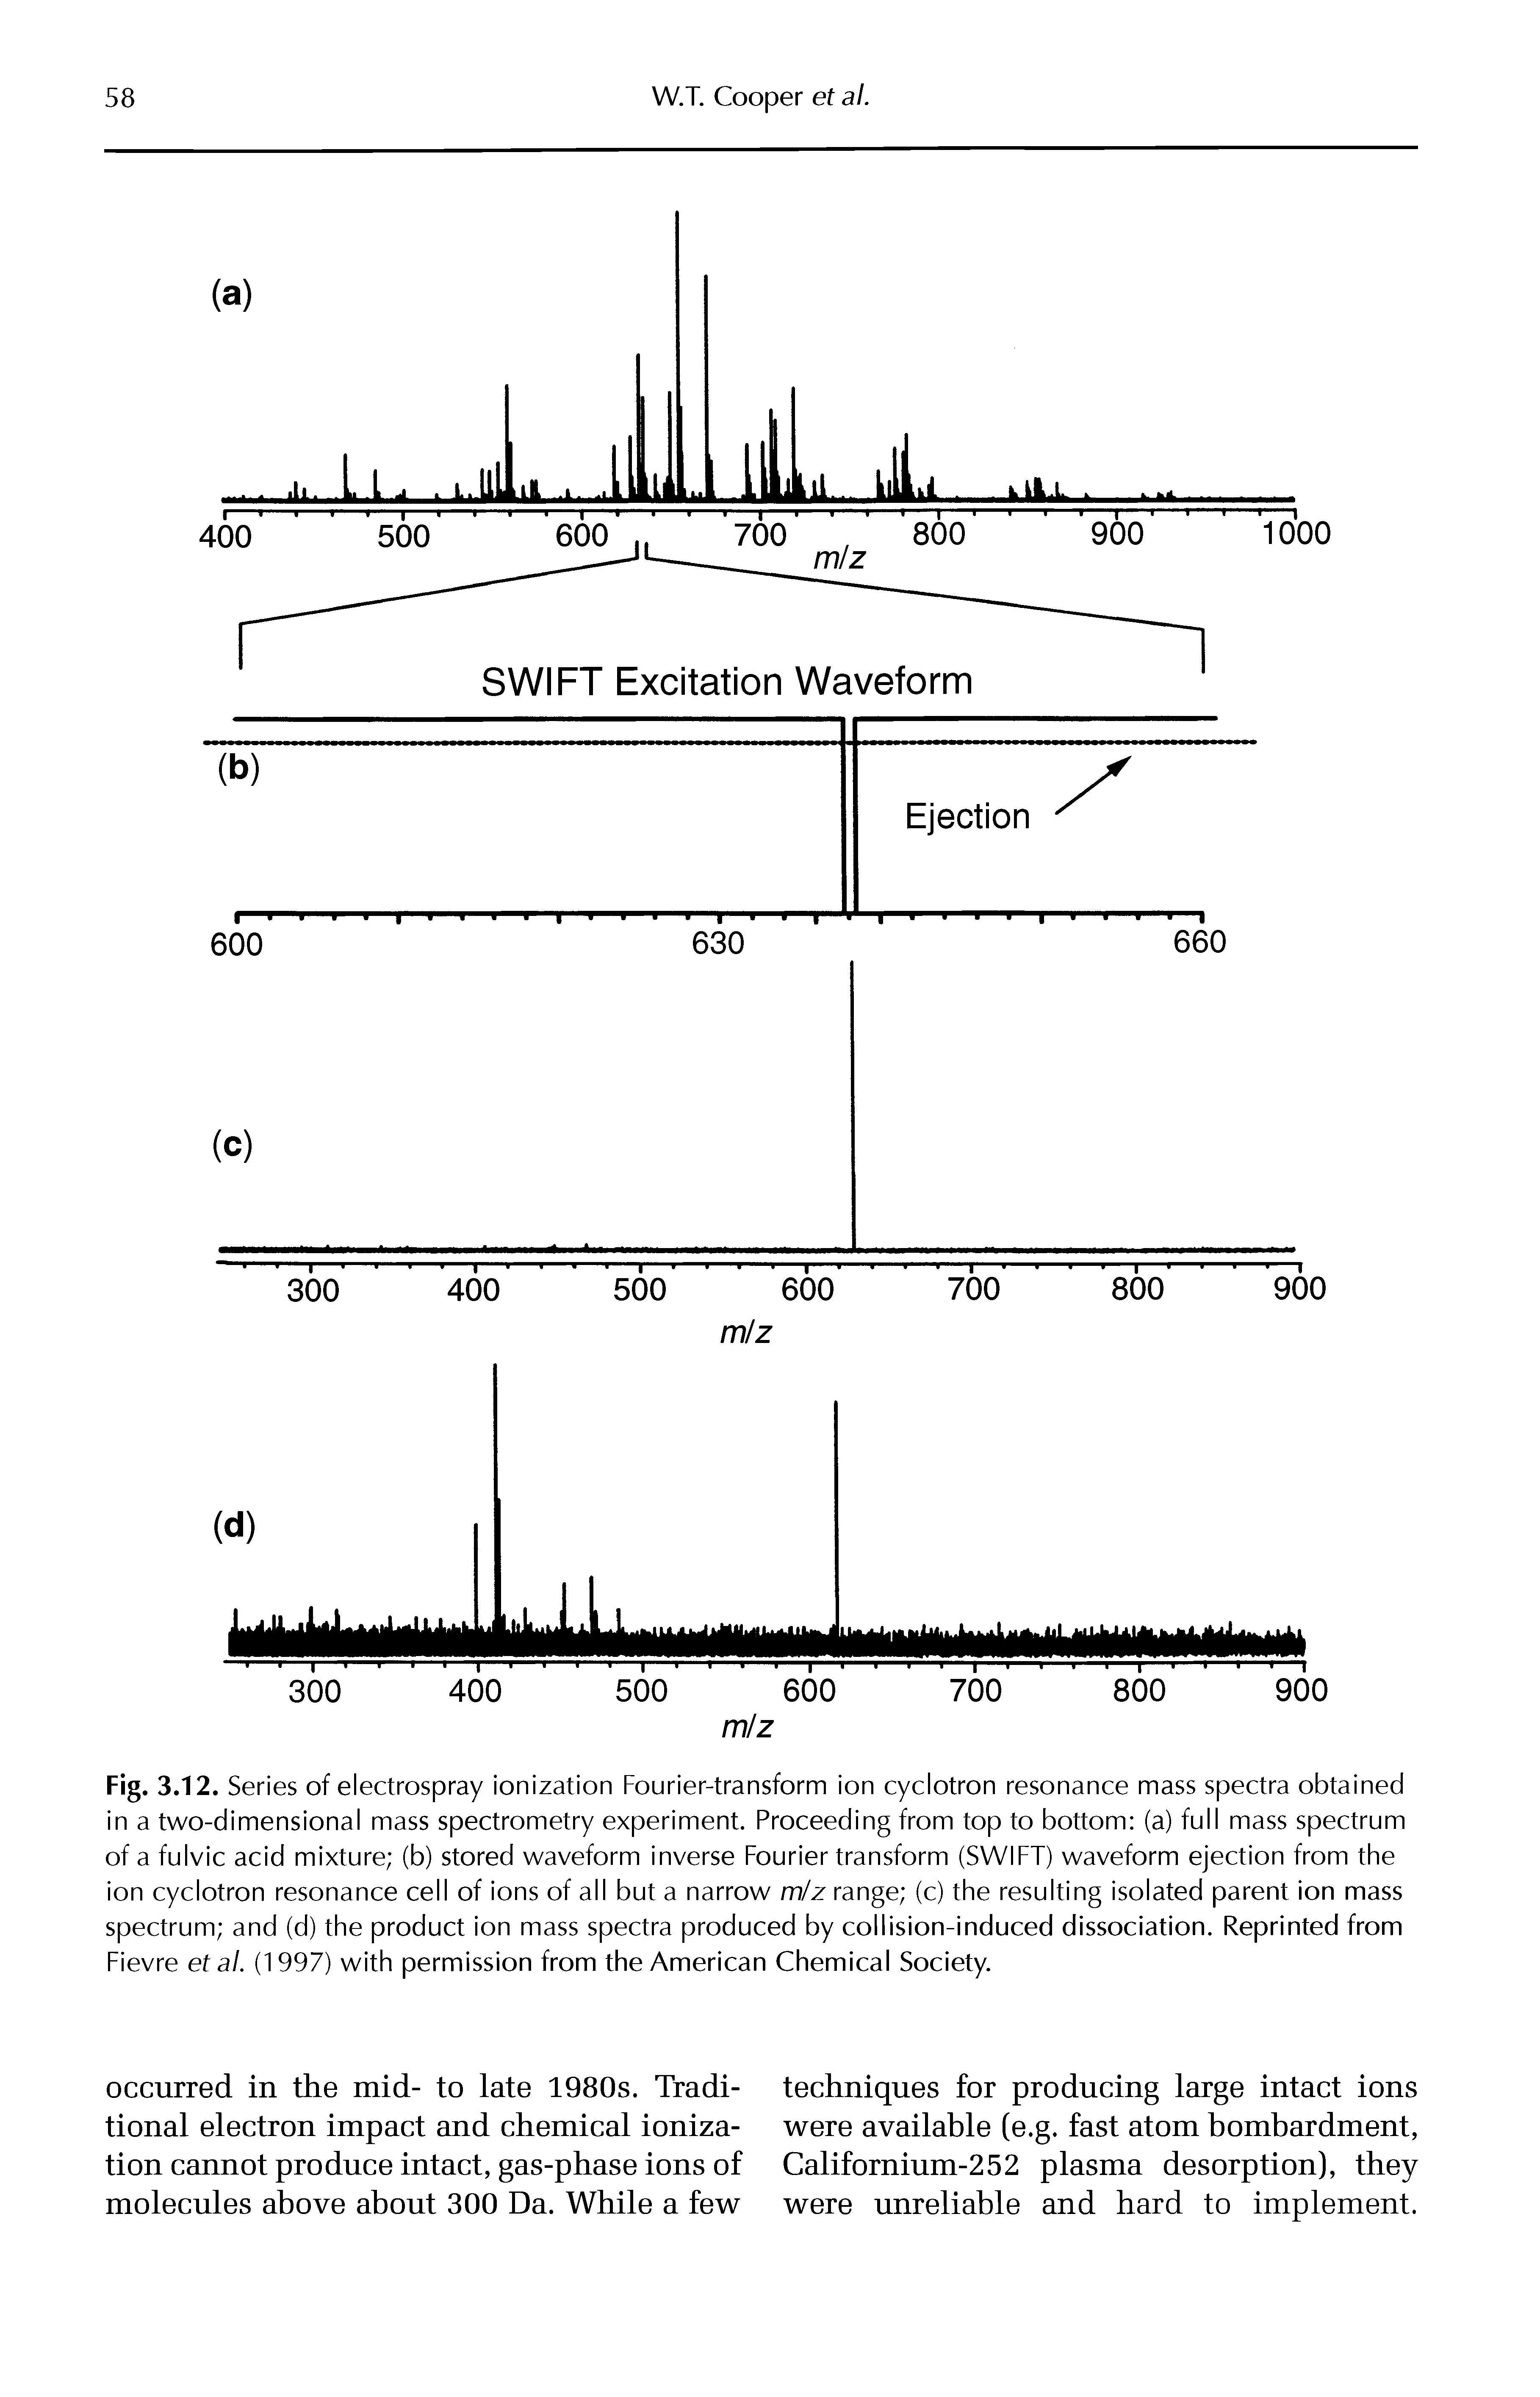 Fig. 3.12. Series of electrospray ionization Fourier-transform ion cyclotron resonance mass spectra obtained in a two-dimensional mass spectrometry experiment. Proceeding from top to bottom (a) full mass spectrum of a fulvic acid mixture (b) stored waveform inverse Fourier transform (SWIFT) waveform ejection from the ion cyclotron resonance cell of ions of all but a narrow m/z range (c) the resulting isolated parent ion mass spectrum and (d) the product ion mass spectra produced by collision-induced dissociation. Reprinted from Fievre etal. (1997) with permission from the American Chemical Society.